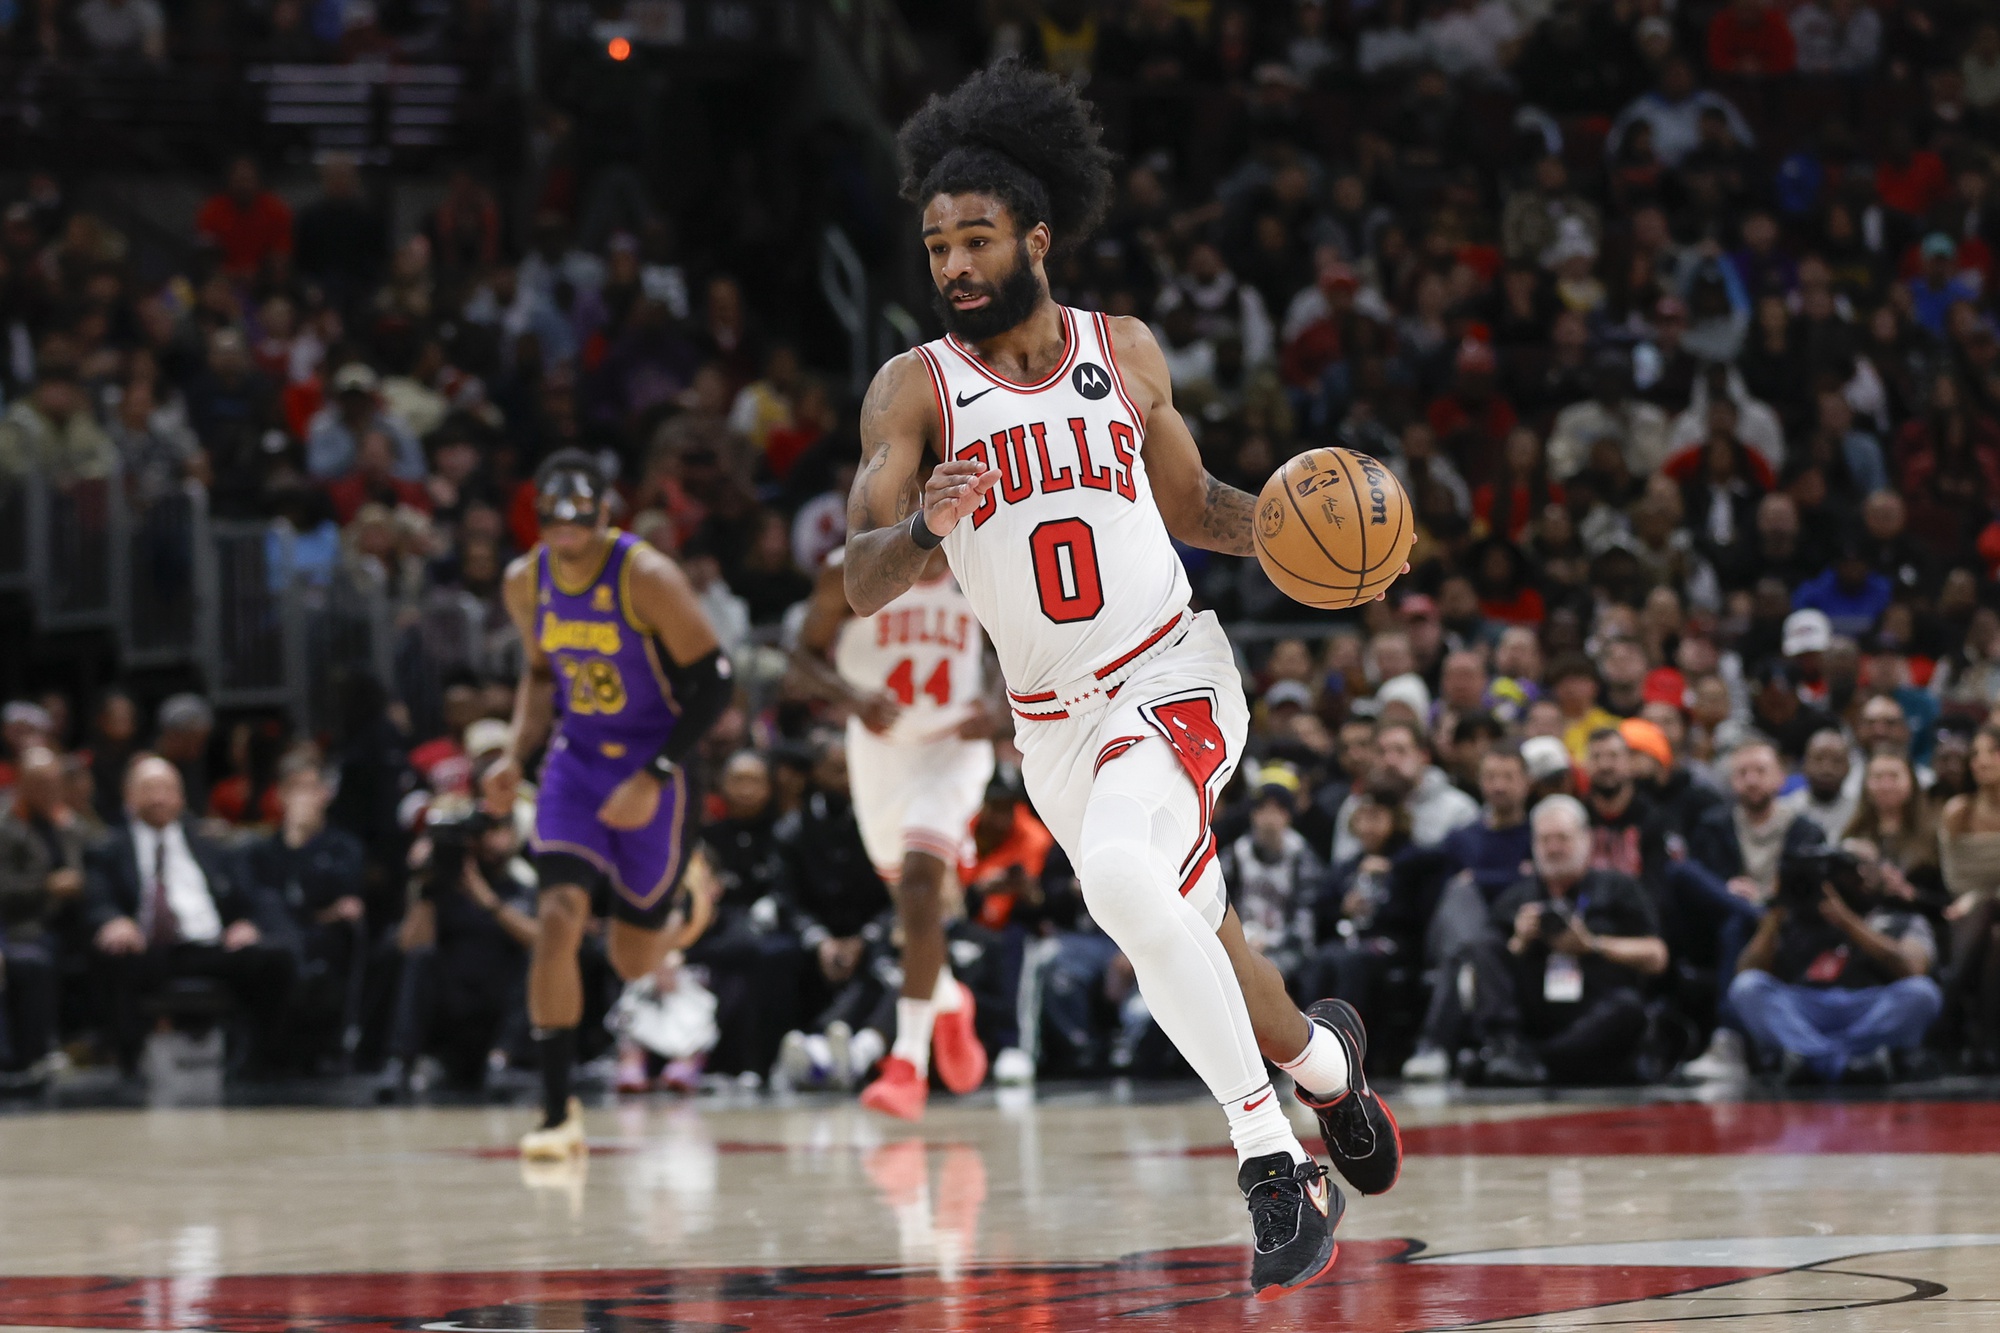 Dec 20, 2023; Chicago, Illinois, USA; Chicago Bulls guard Coby White (0) brings the ball up court against the Los Angeles Lakers during the first half at United Center. Mandatory Credit: Kamil Krzaczynski-USA TODAY Sports